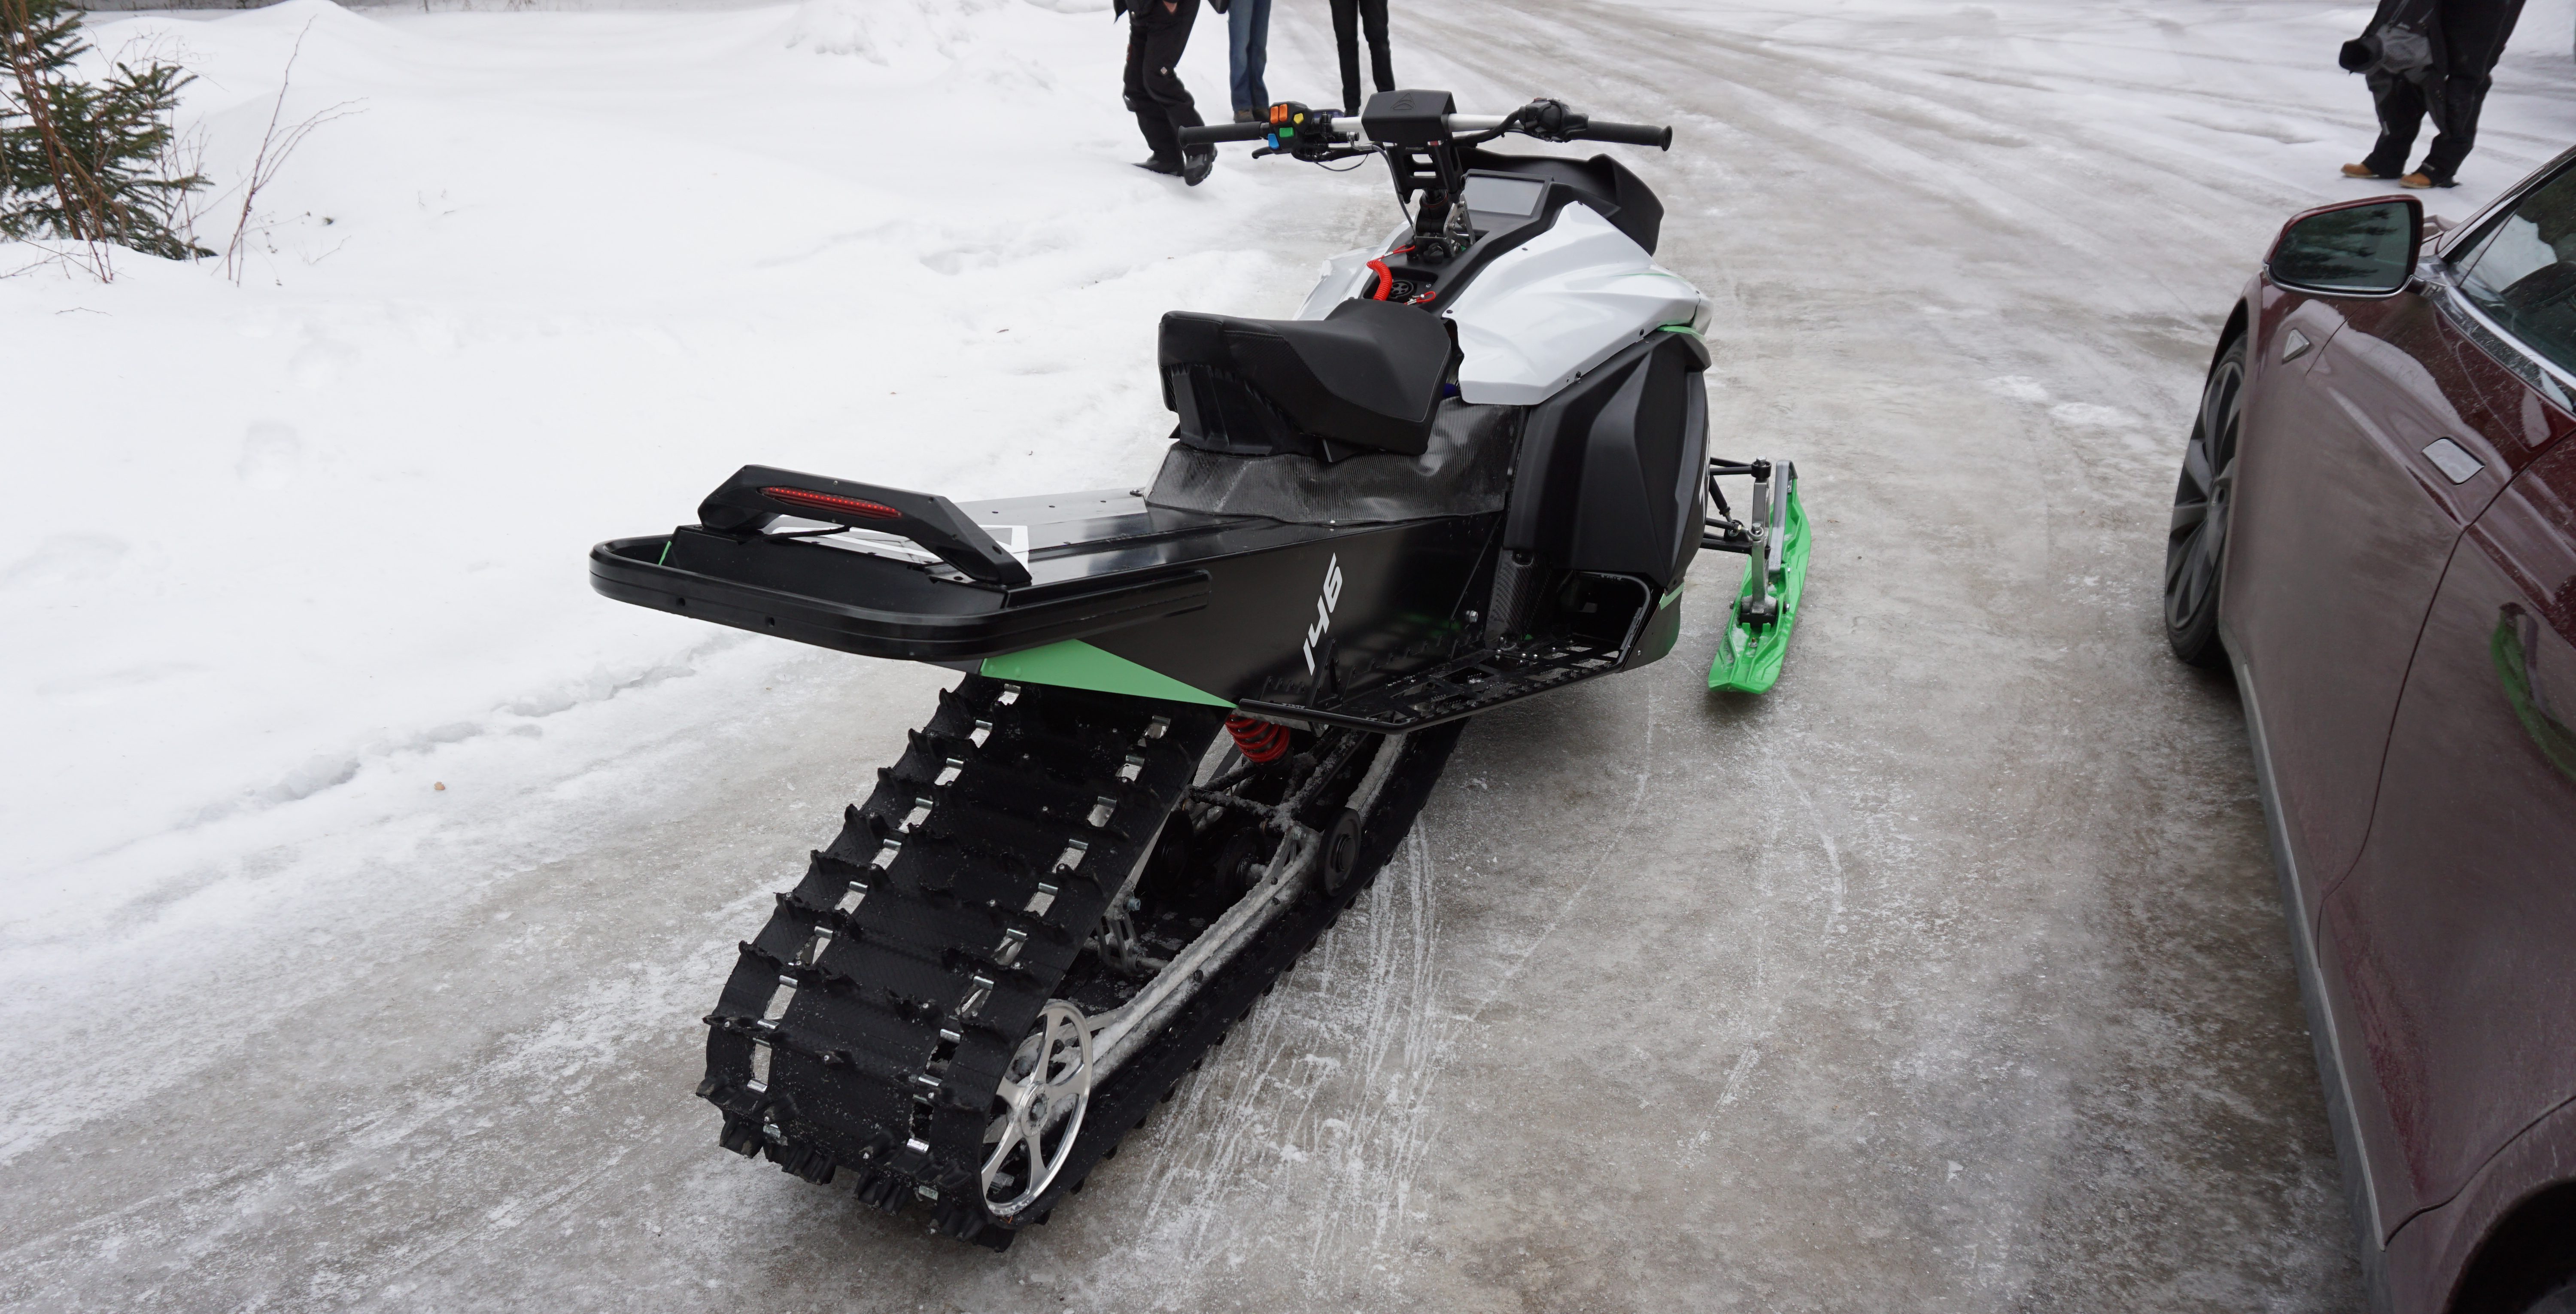 Teslainspired Taiga electric snowmobile does 060 mph in 3 seconds